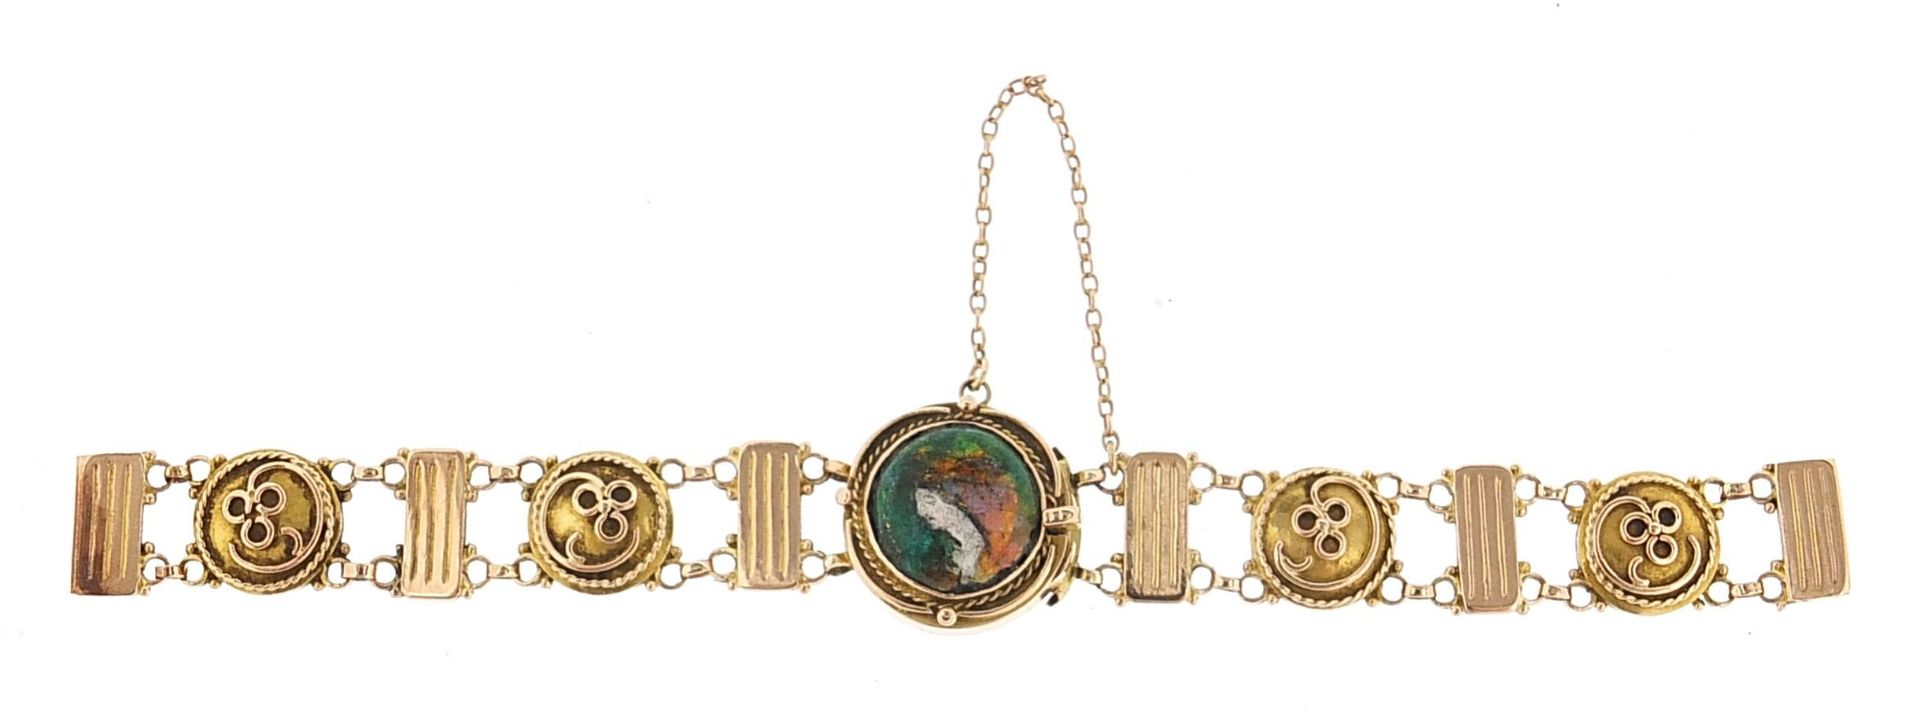 Manner of Liberty & Co, Art Nouveau unmarked gold and enamel bracelet decorated with a female, tests - Bild 2 aus 3